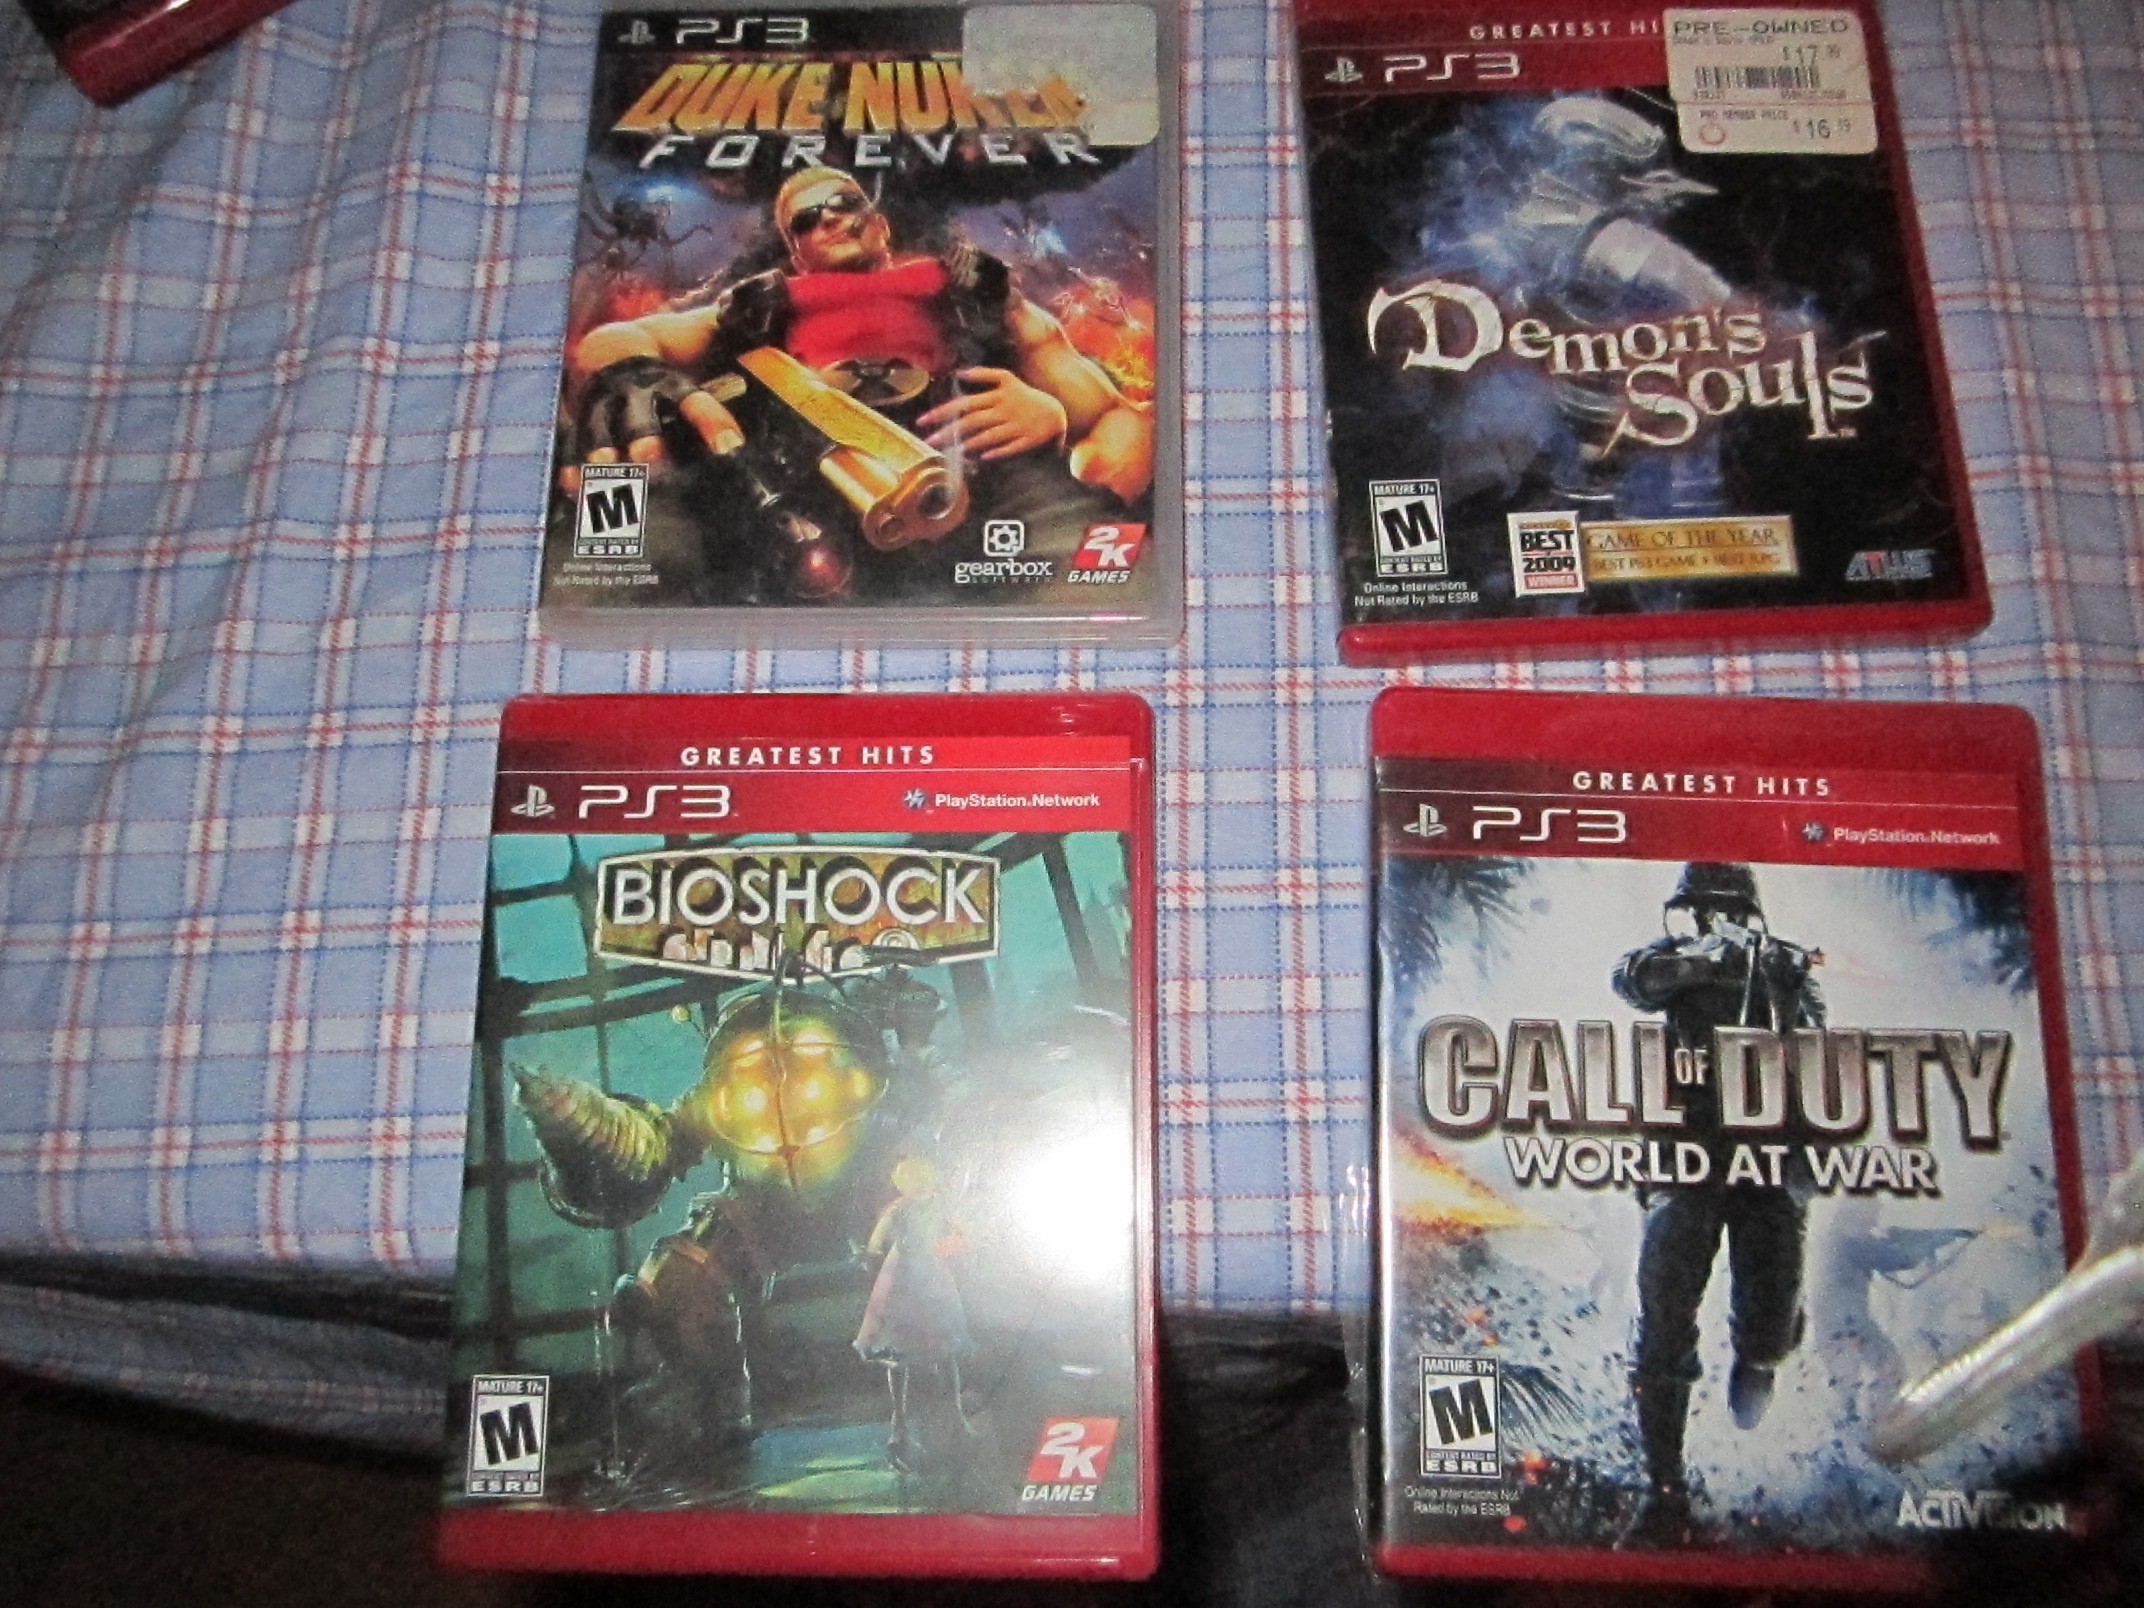 I have been meaning to play these but have not gotten around to it.